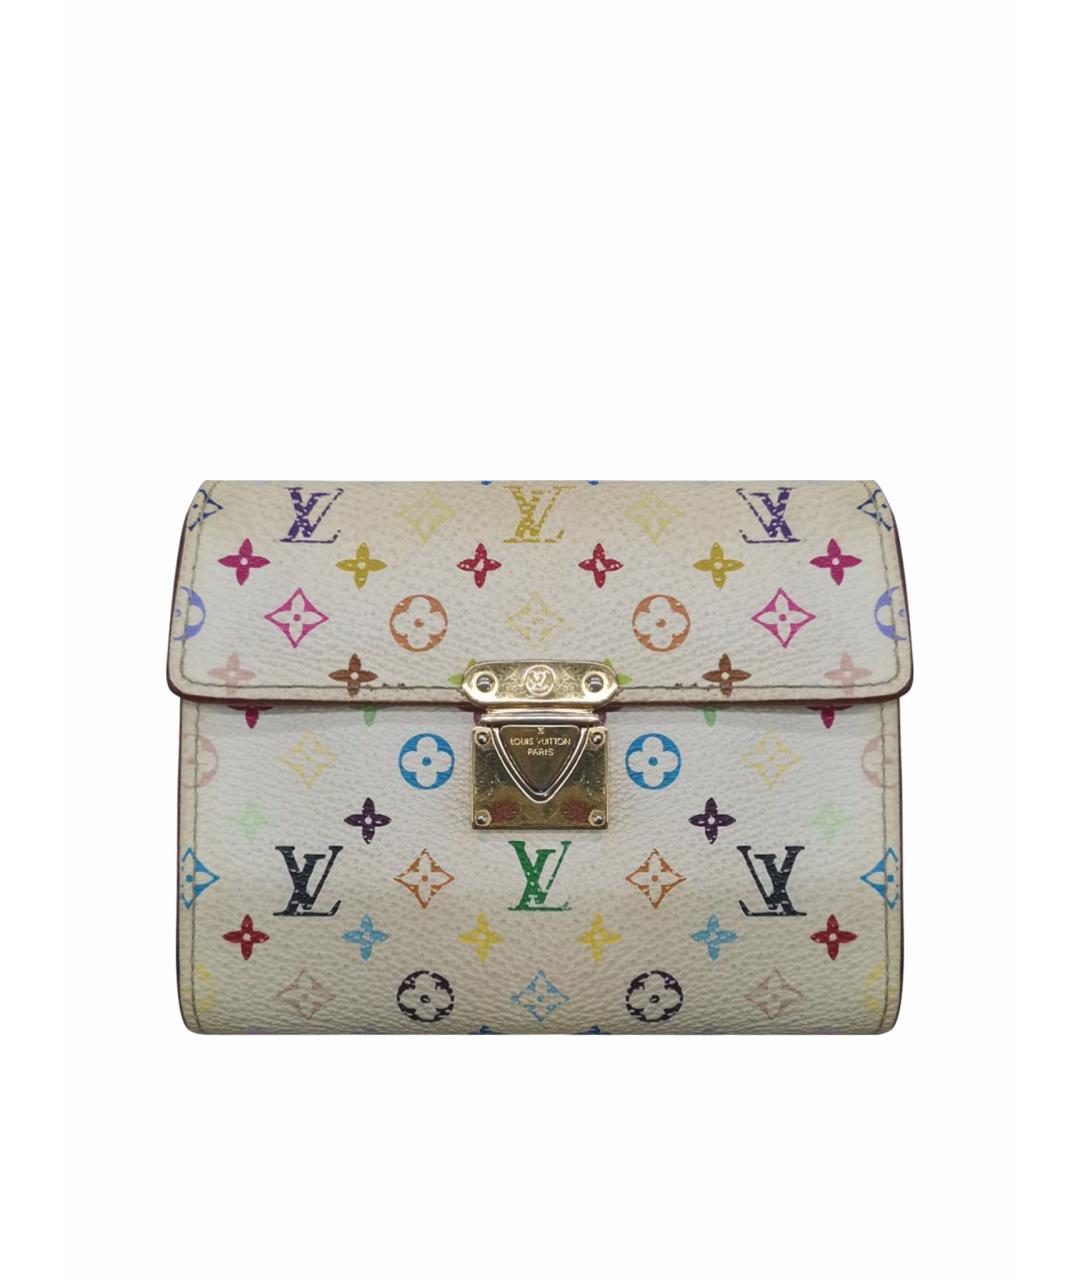 LOUIS VUITTON PRE-OWNED Белый кошелек, фото 1